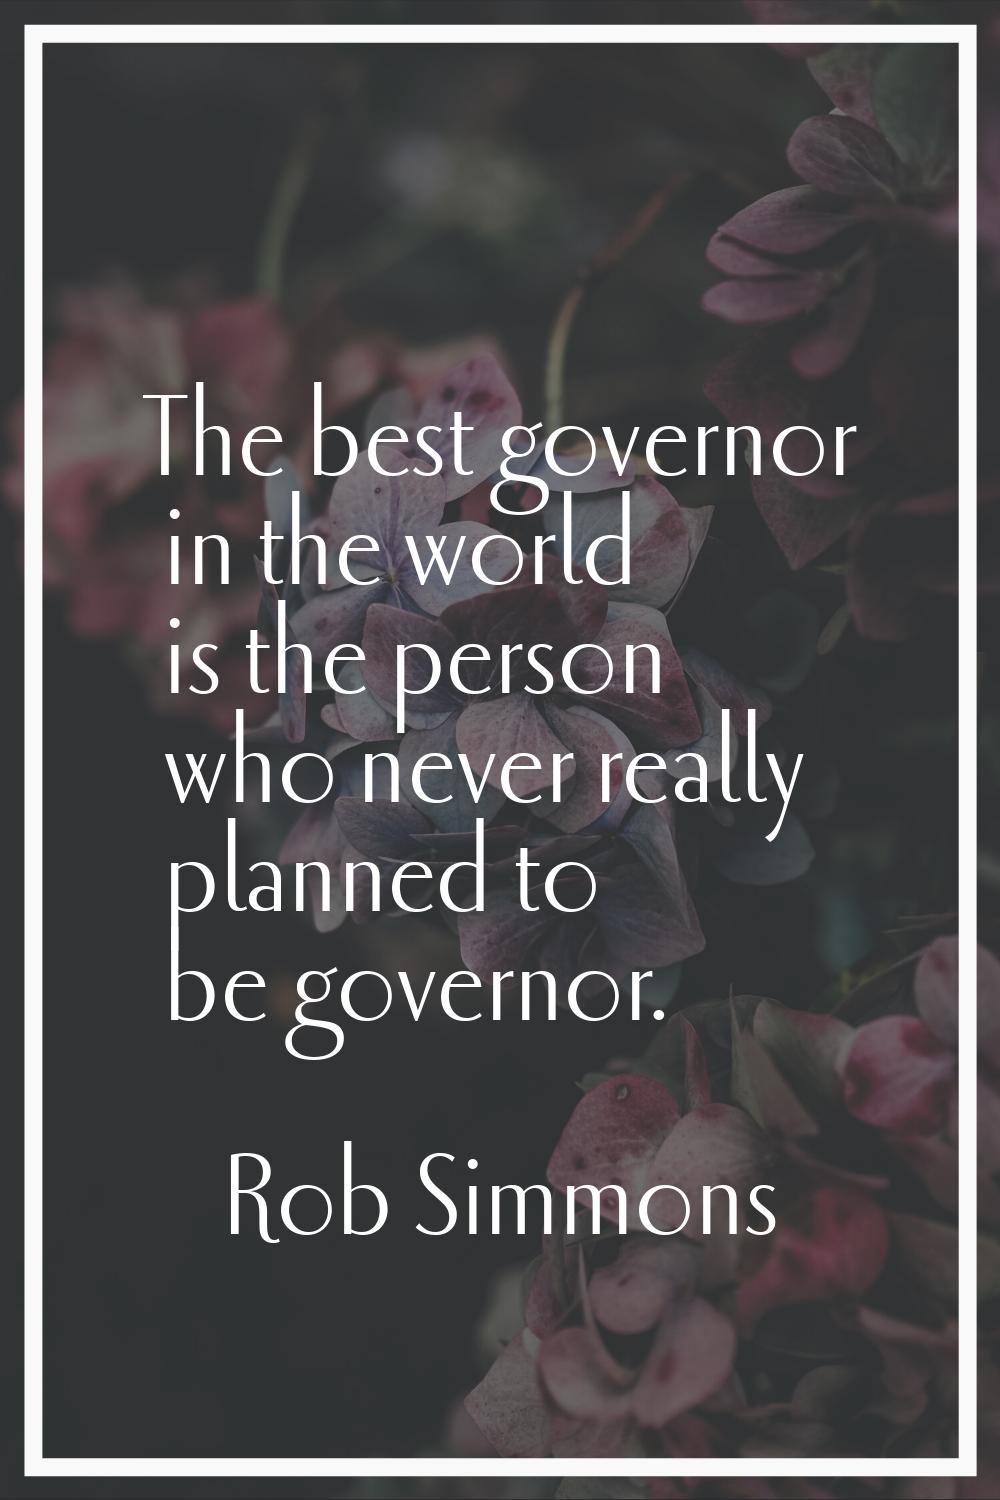 The best governor in the world is the person who never really planned to be governor.